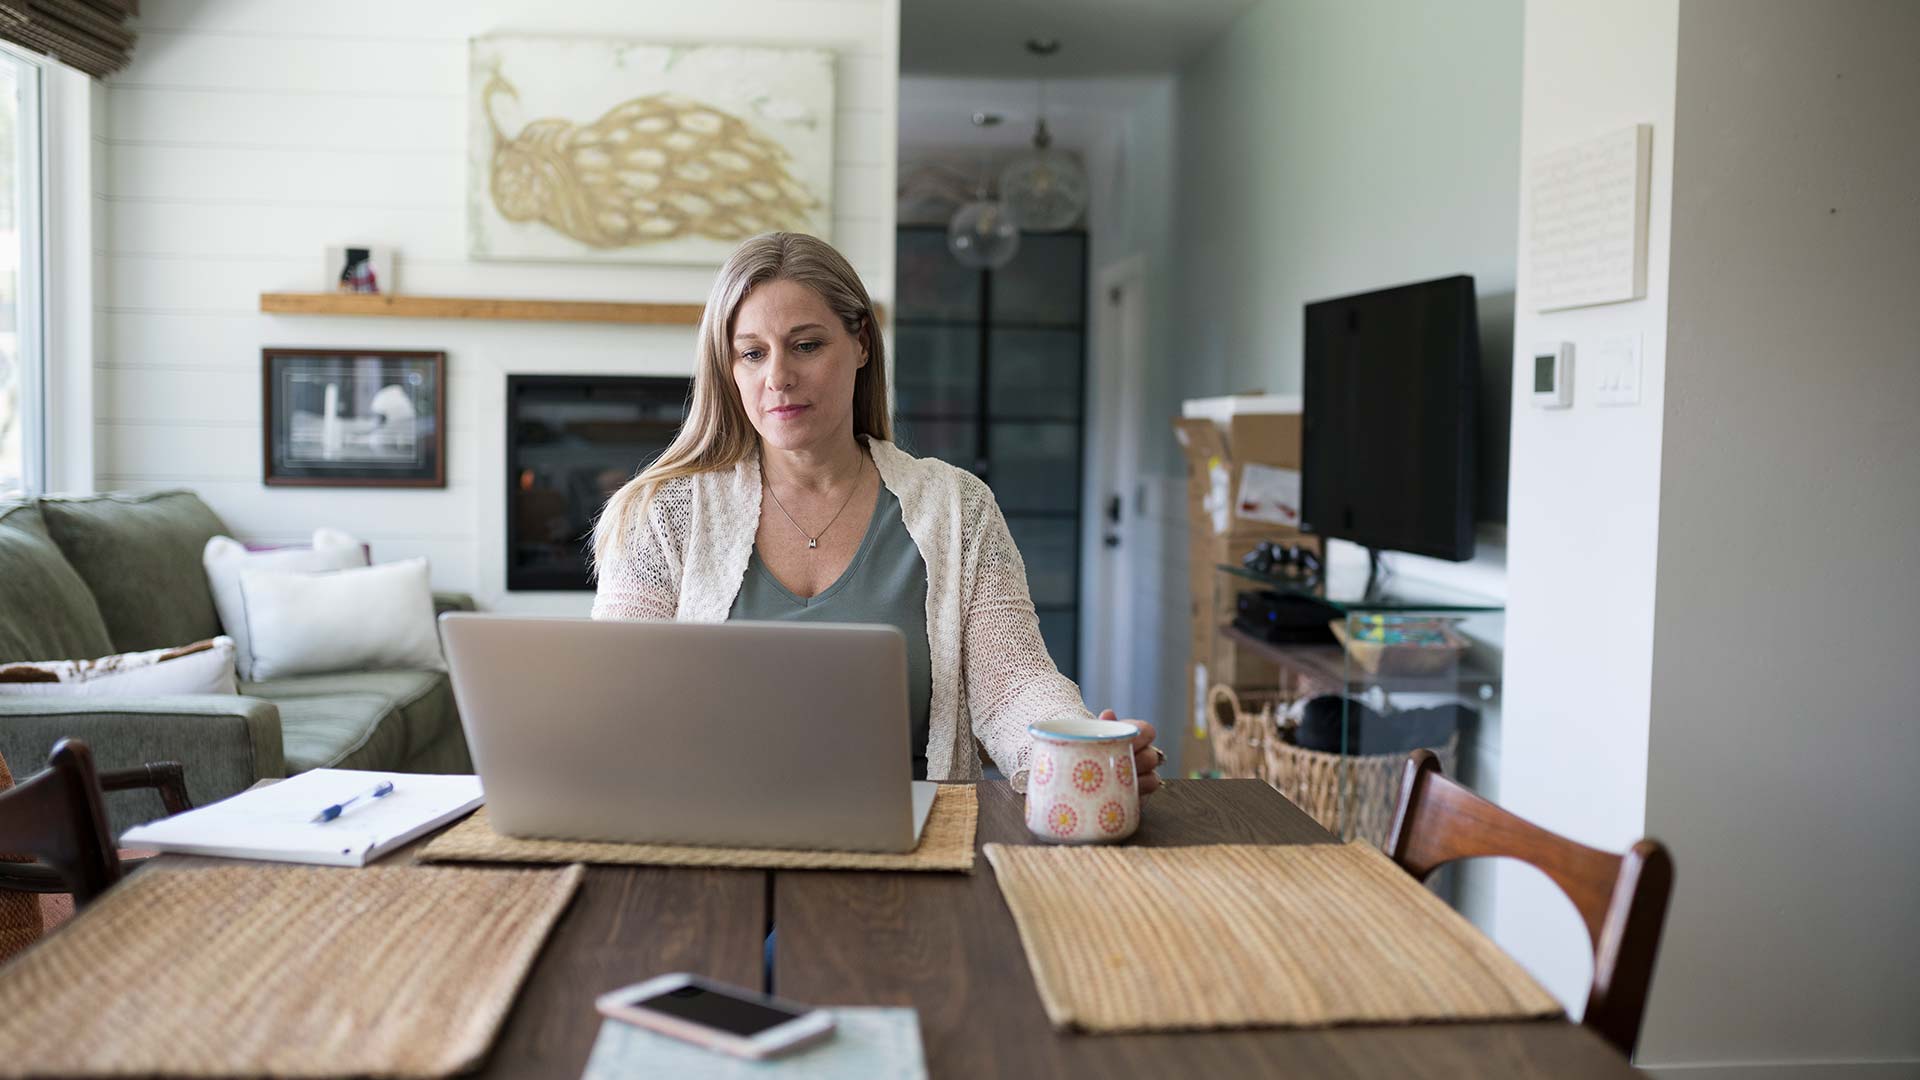 A woman working from home on her laptop